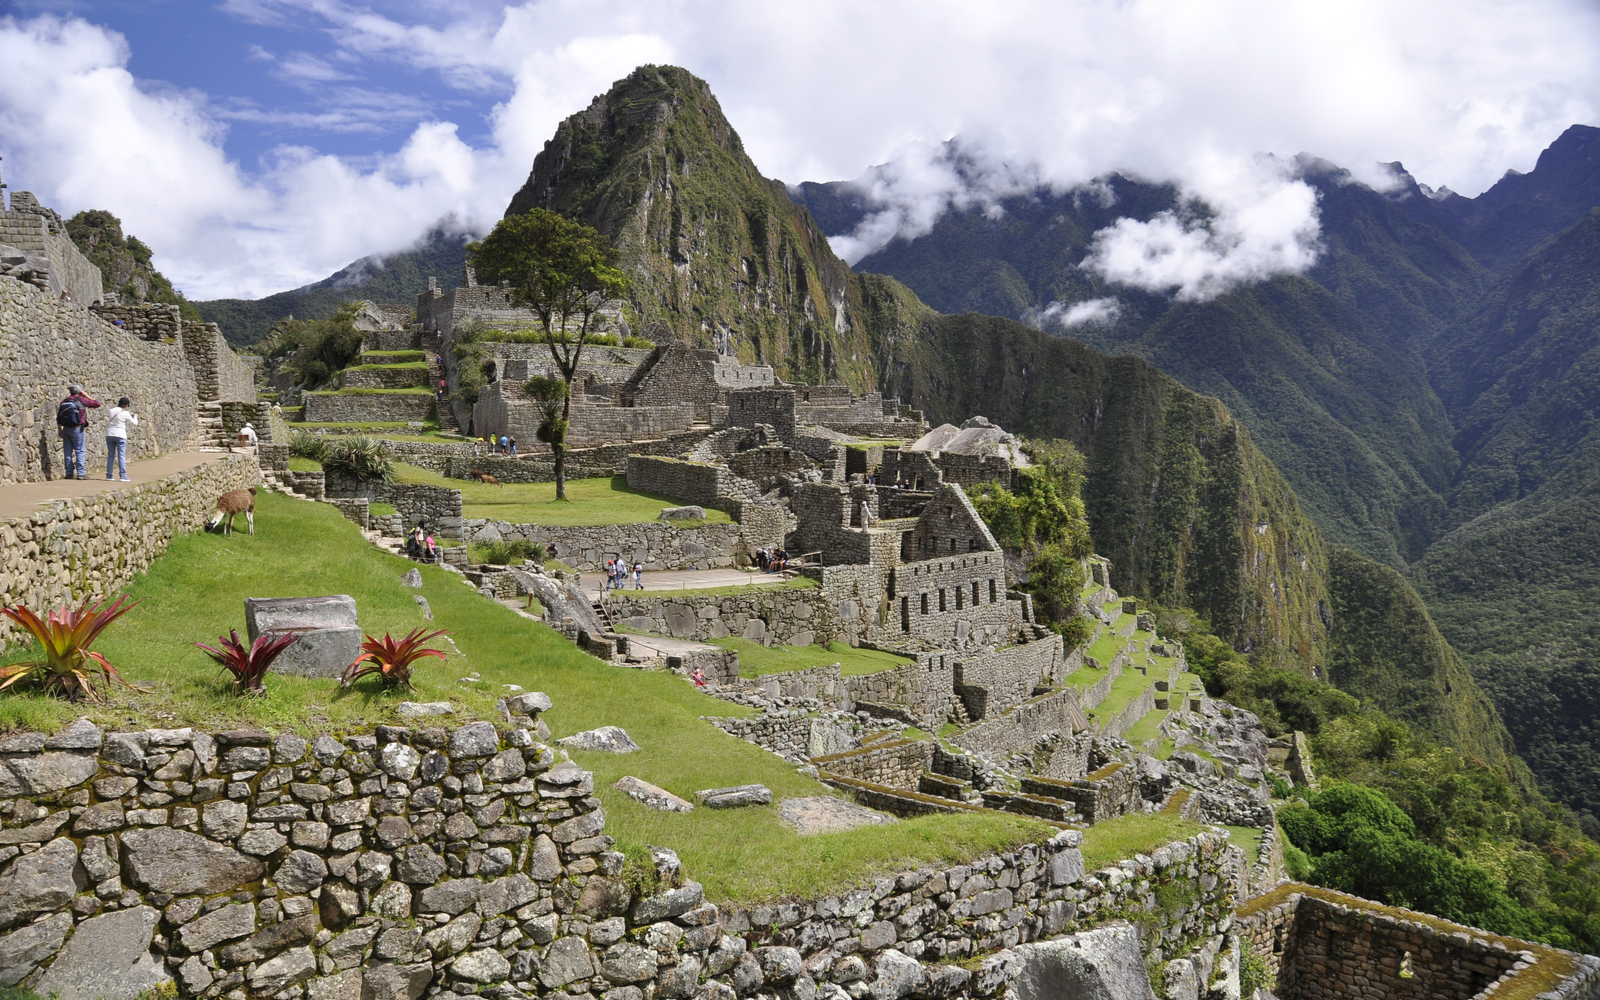 For a piece titled The Best Time to Visit Peru, Machu Picchu sits under some clouds on an otherwise nice day